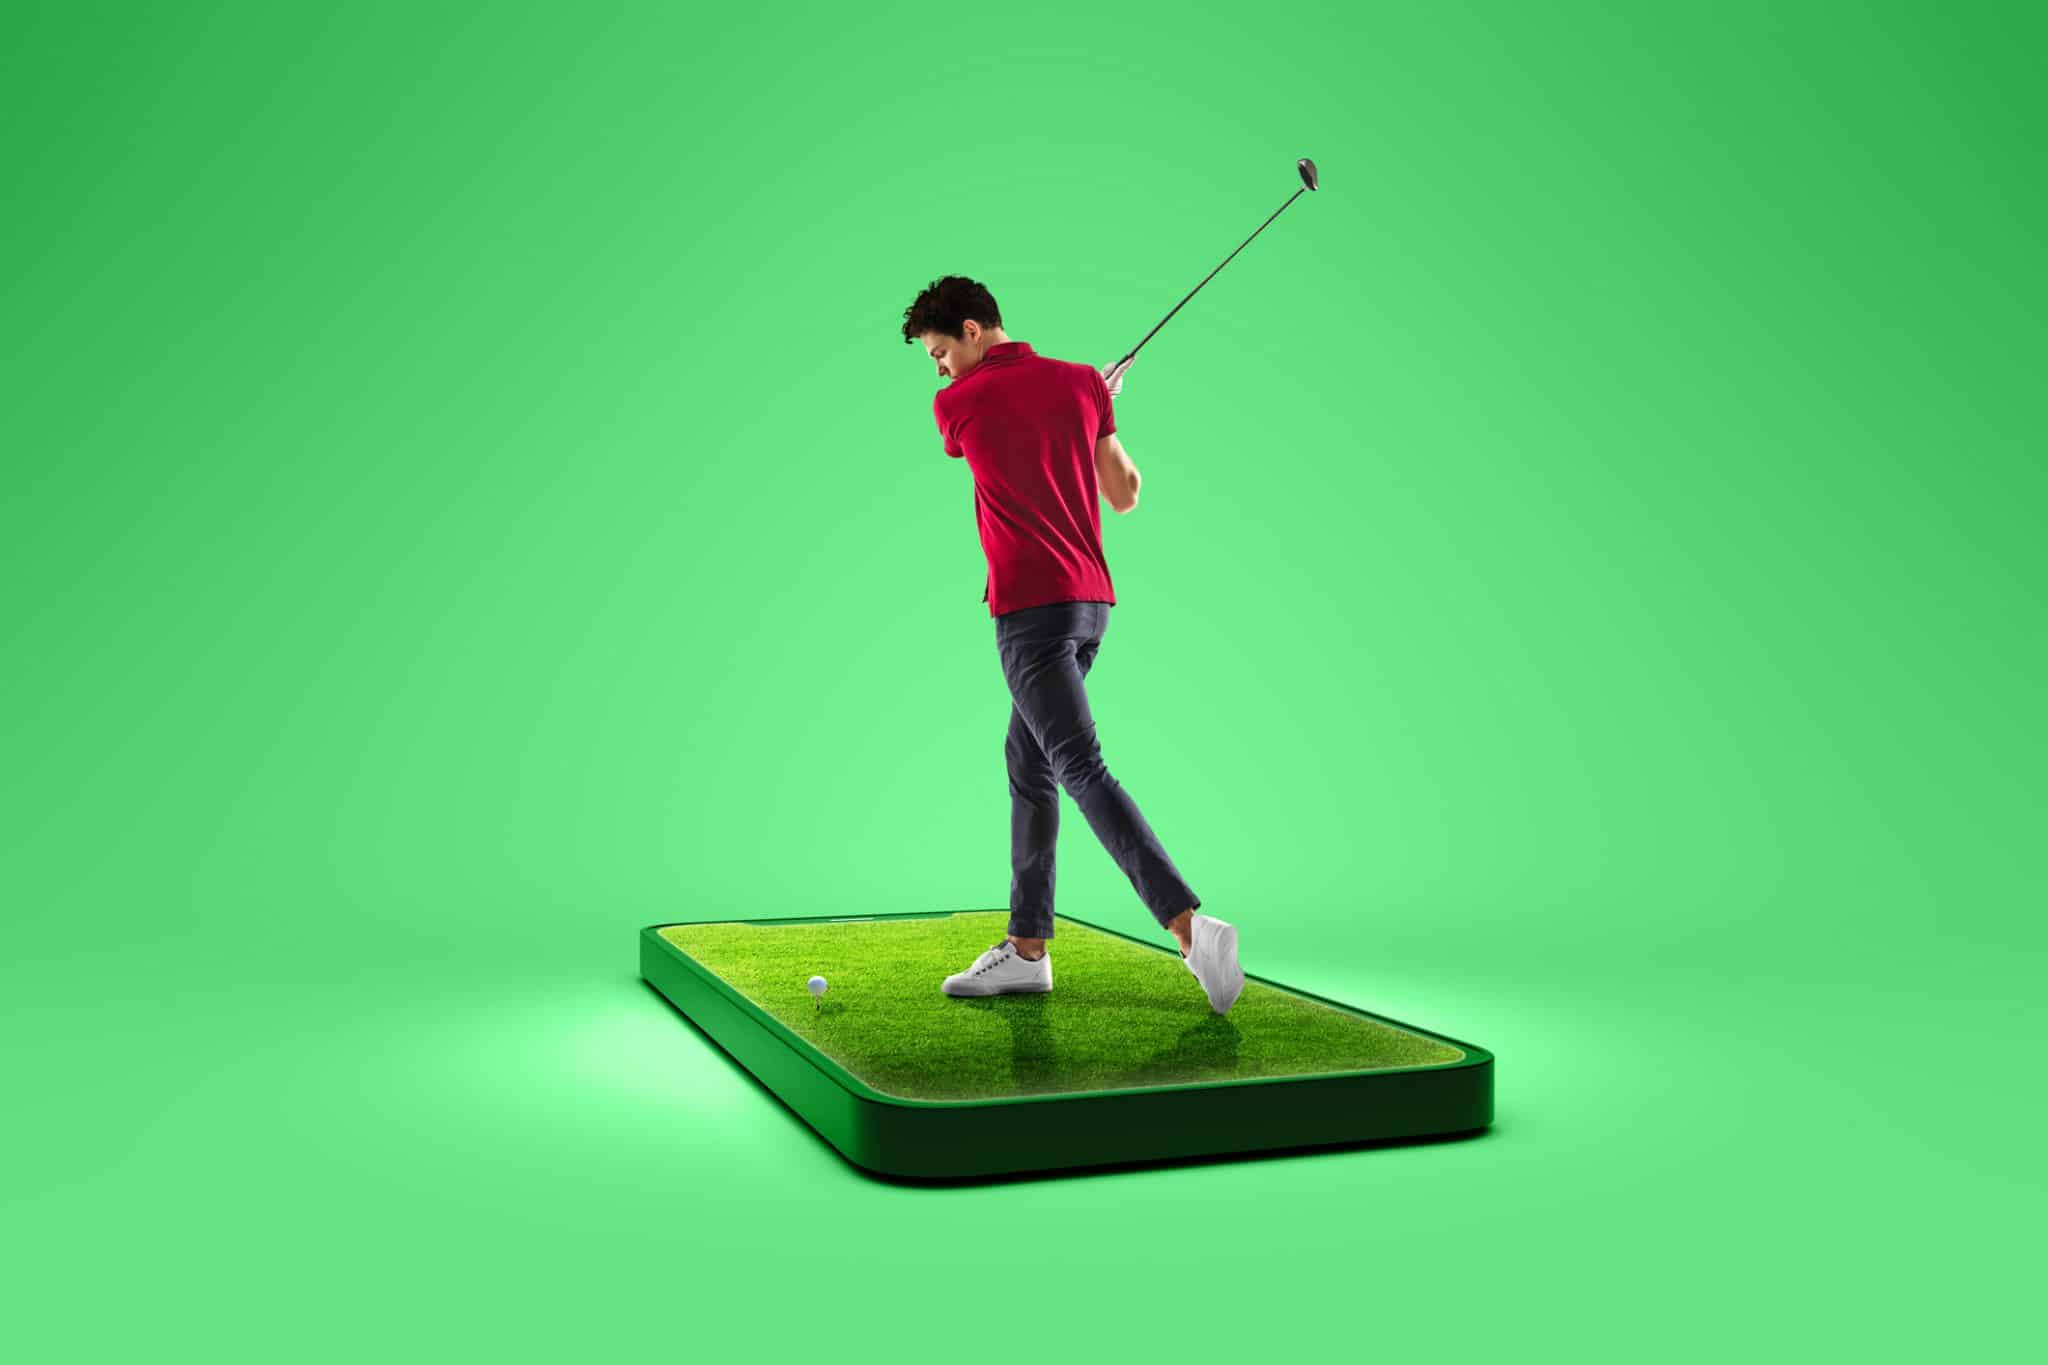 Image of a golf player